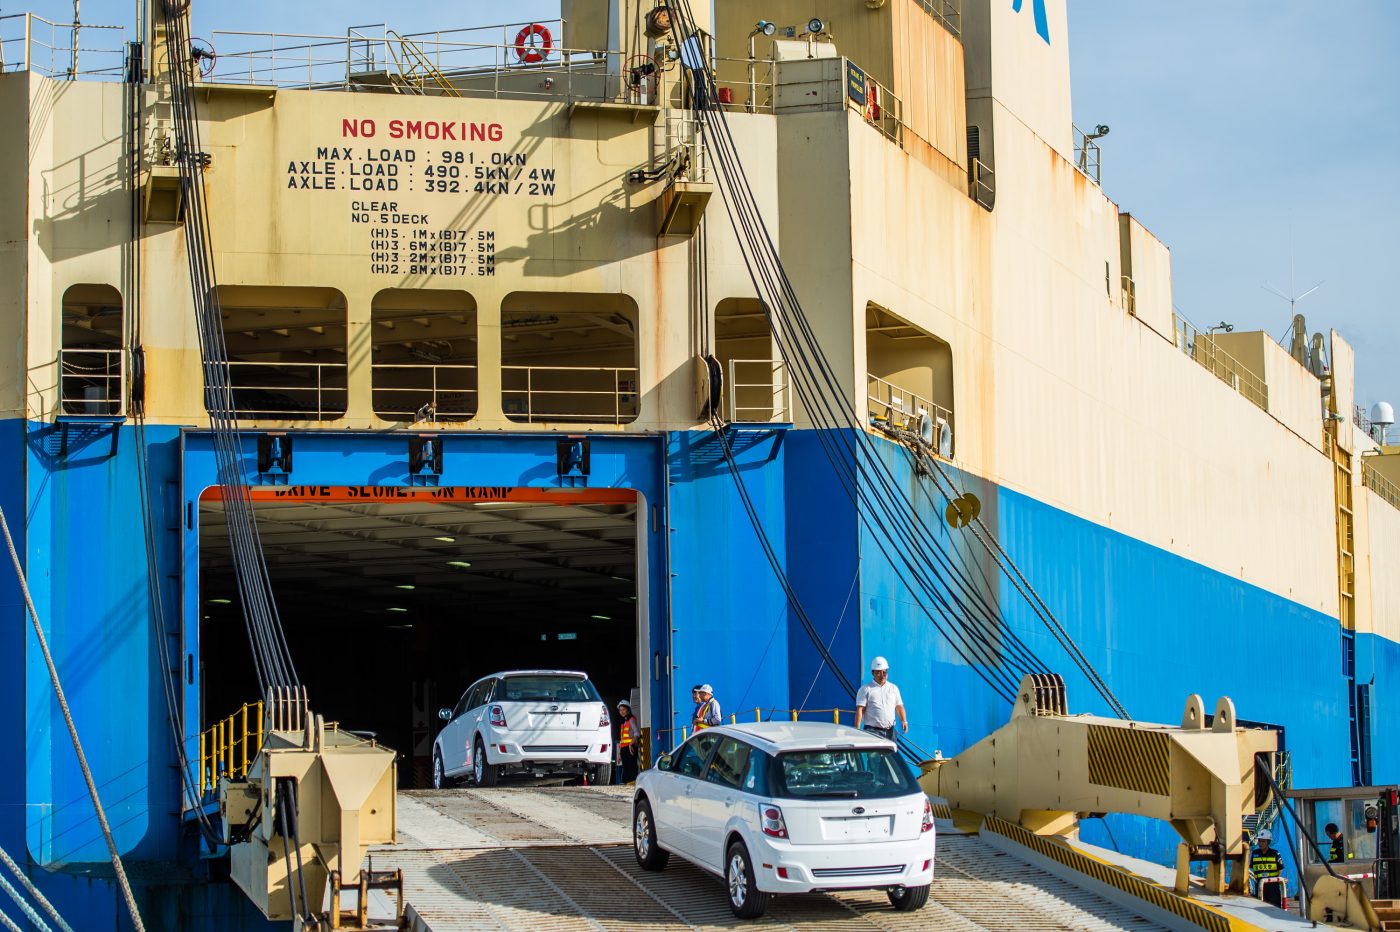 Photo: BYD pure electric e6 cars to be exported to Thailand drive into a cargo ship at the Dachanwan Port in Shenzhen city, south China's Guangdong province, 12 July 2018. China's battery and electric car maker BYD Co Ltd delivered 100 pure electric e6 cars to Thailand on Thursday (12 July 2018). These electric cars will be VIP taxis in Bangkok. Credit: Blanches via Rueters